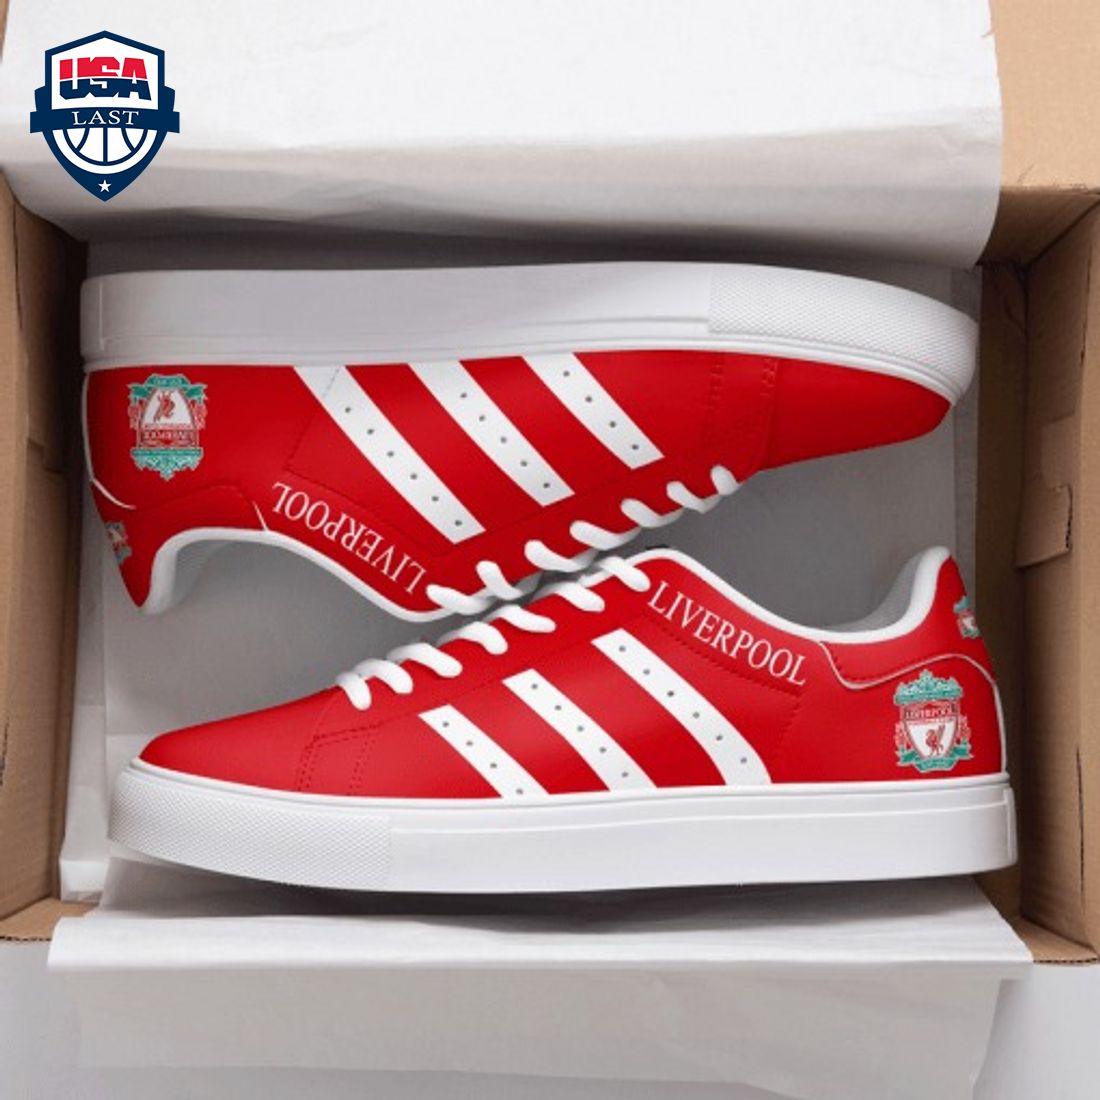 liverpool-fc-white-stripes-style-2-stan-smith-low-top-shoes-1-vz0or.jpg